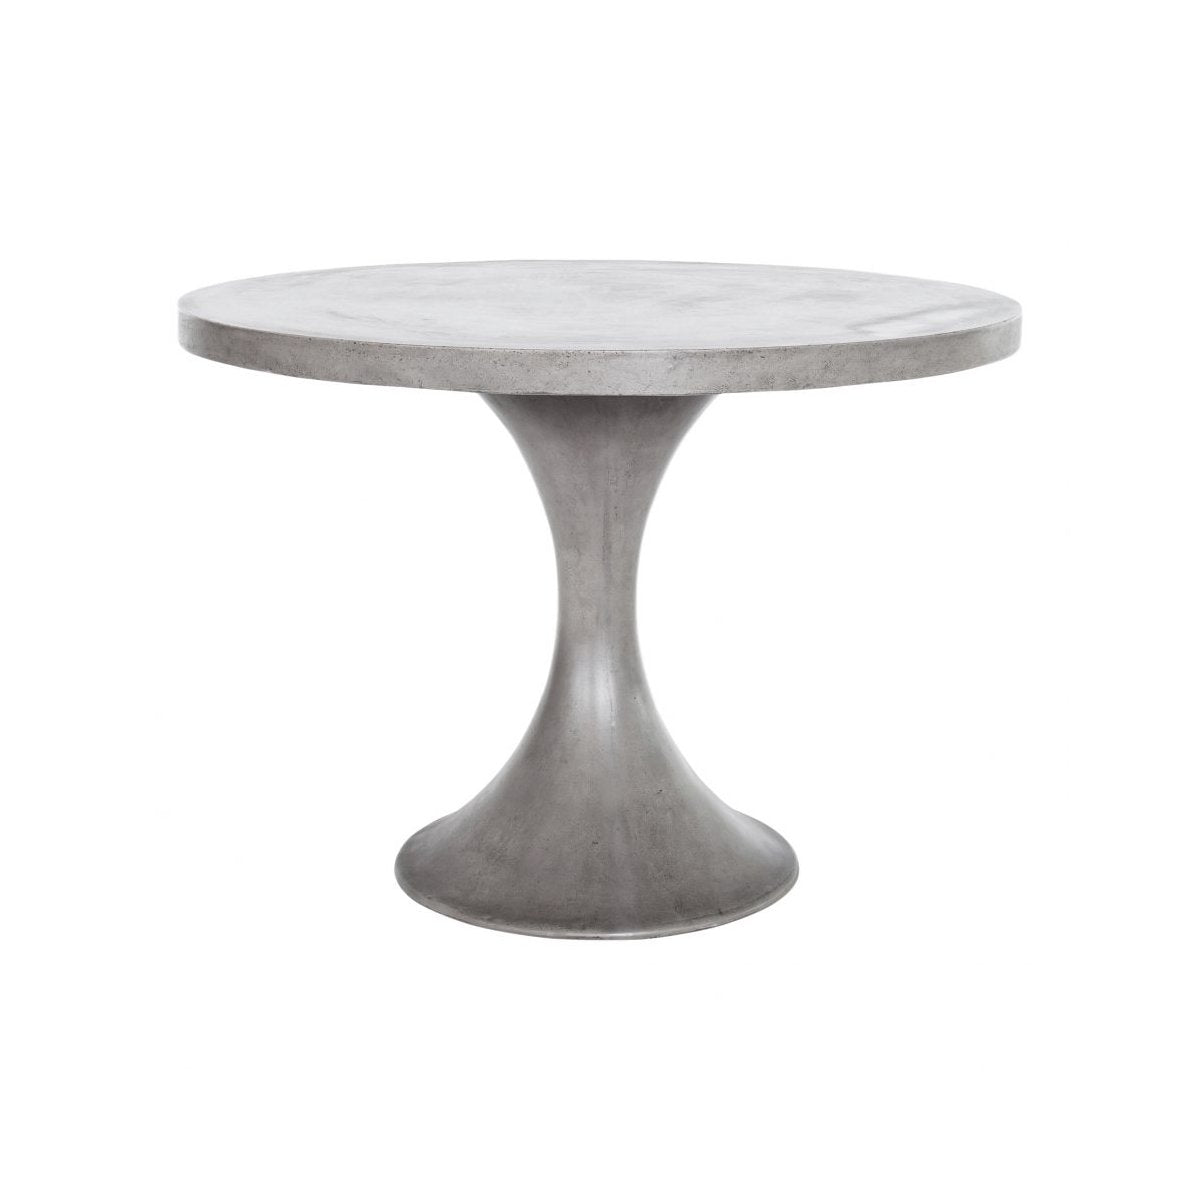 Isadora Outdoor Dining Table Dining Tables Moe's     Four Hands, Burke Decor, Mid Century Modern Furniture, Old Bones Furniture Company, Old Bones Co, Modern Mid Century, Designer Furniture, https://www.oldbonesco.com/